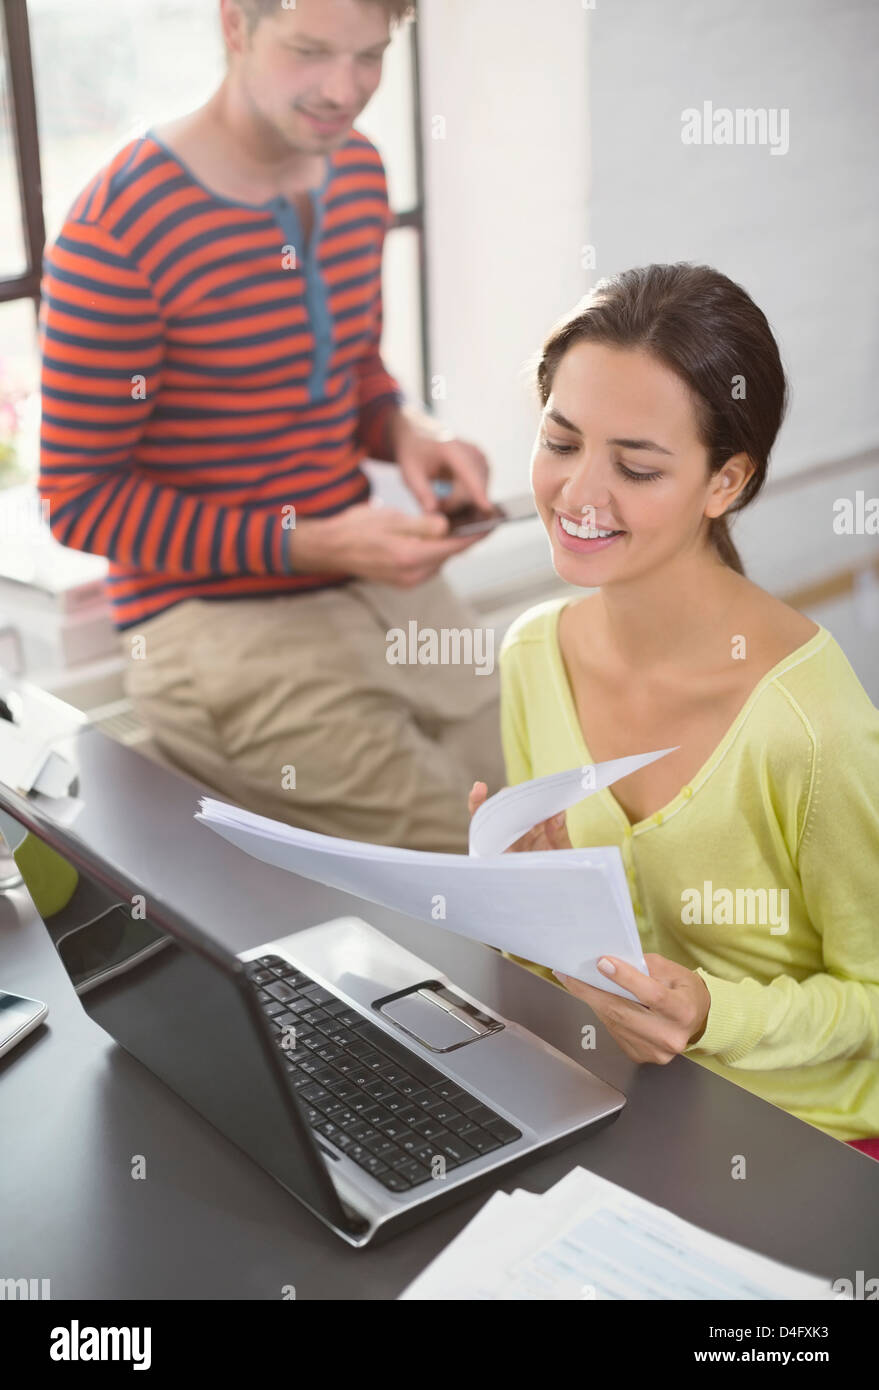 Couple working together at desk Stock Photo